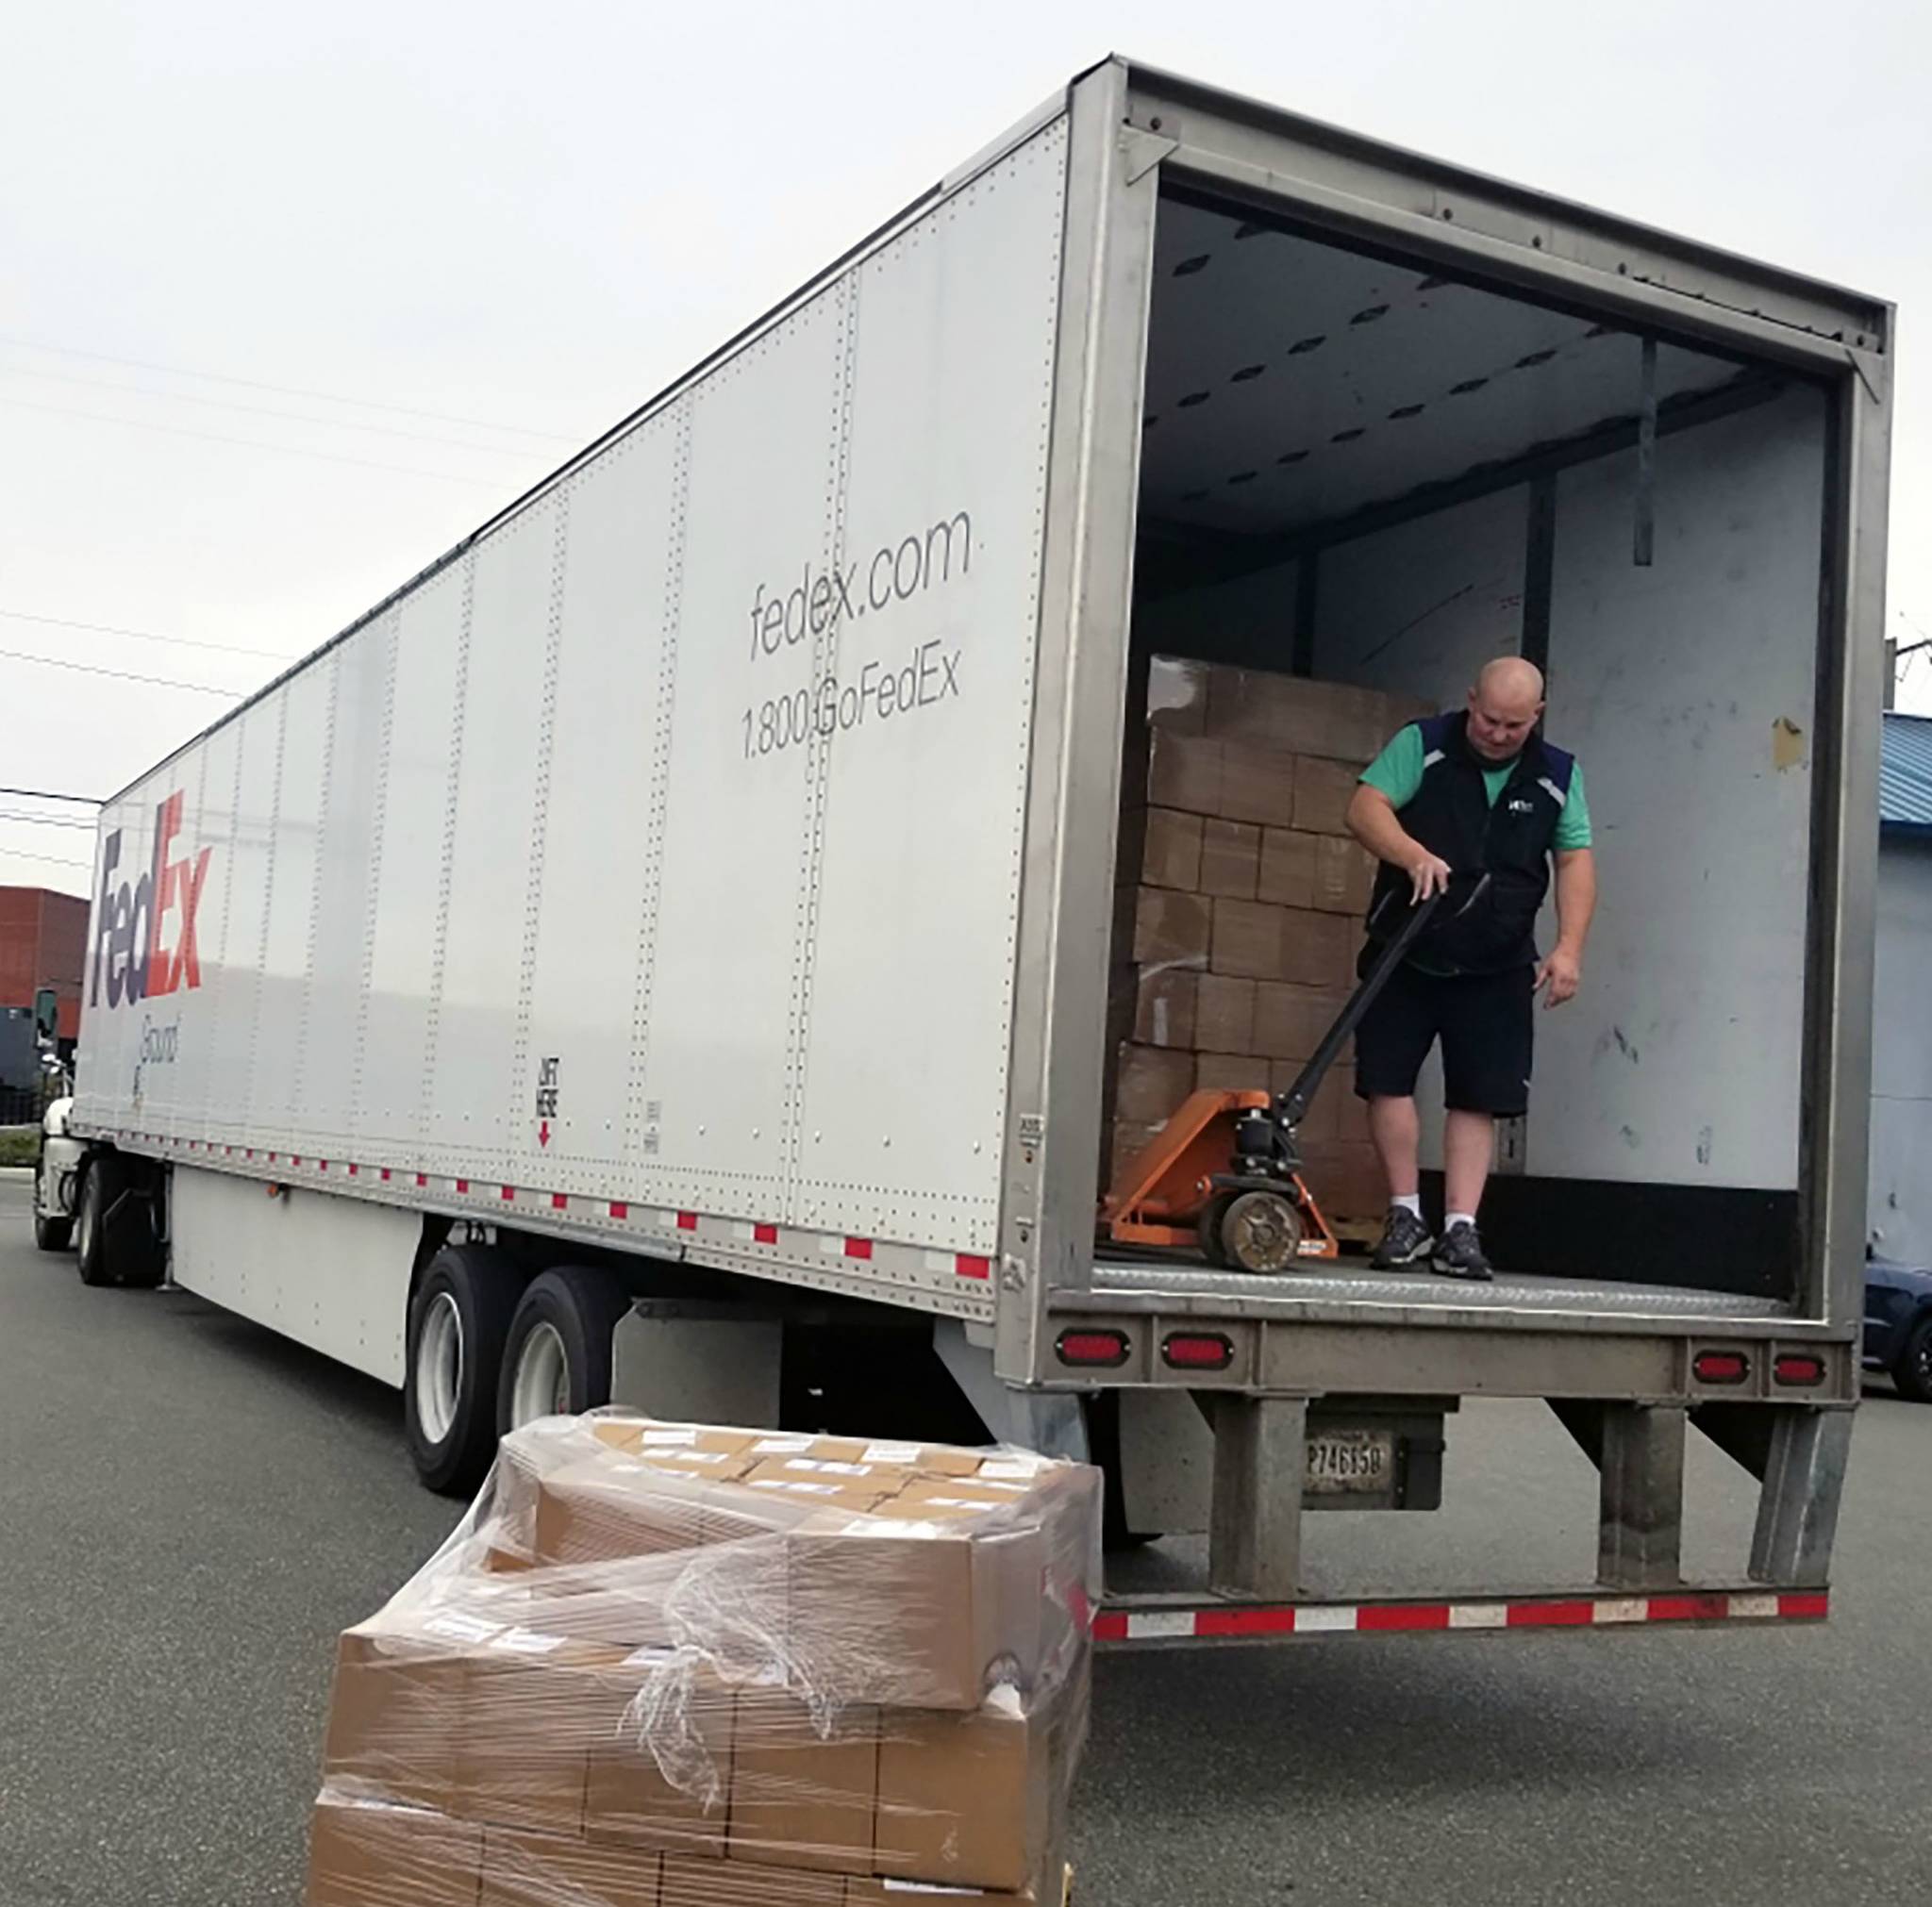 Treehouse sends out its first shipment of Holiday Magic packages — 3,950 gifts, filling this 53-foot trailer in November. Treehouse will send out more than 5,000 meaningful gifts through the Holiday Magic program this season. Courtesy photo